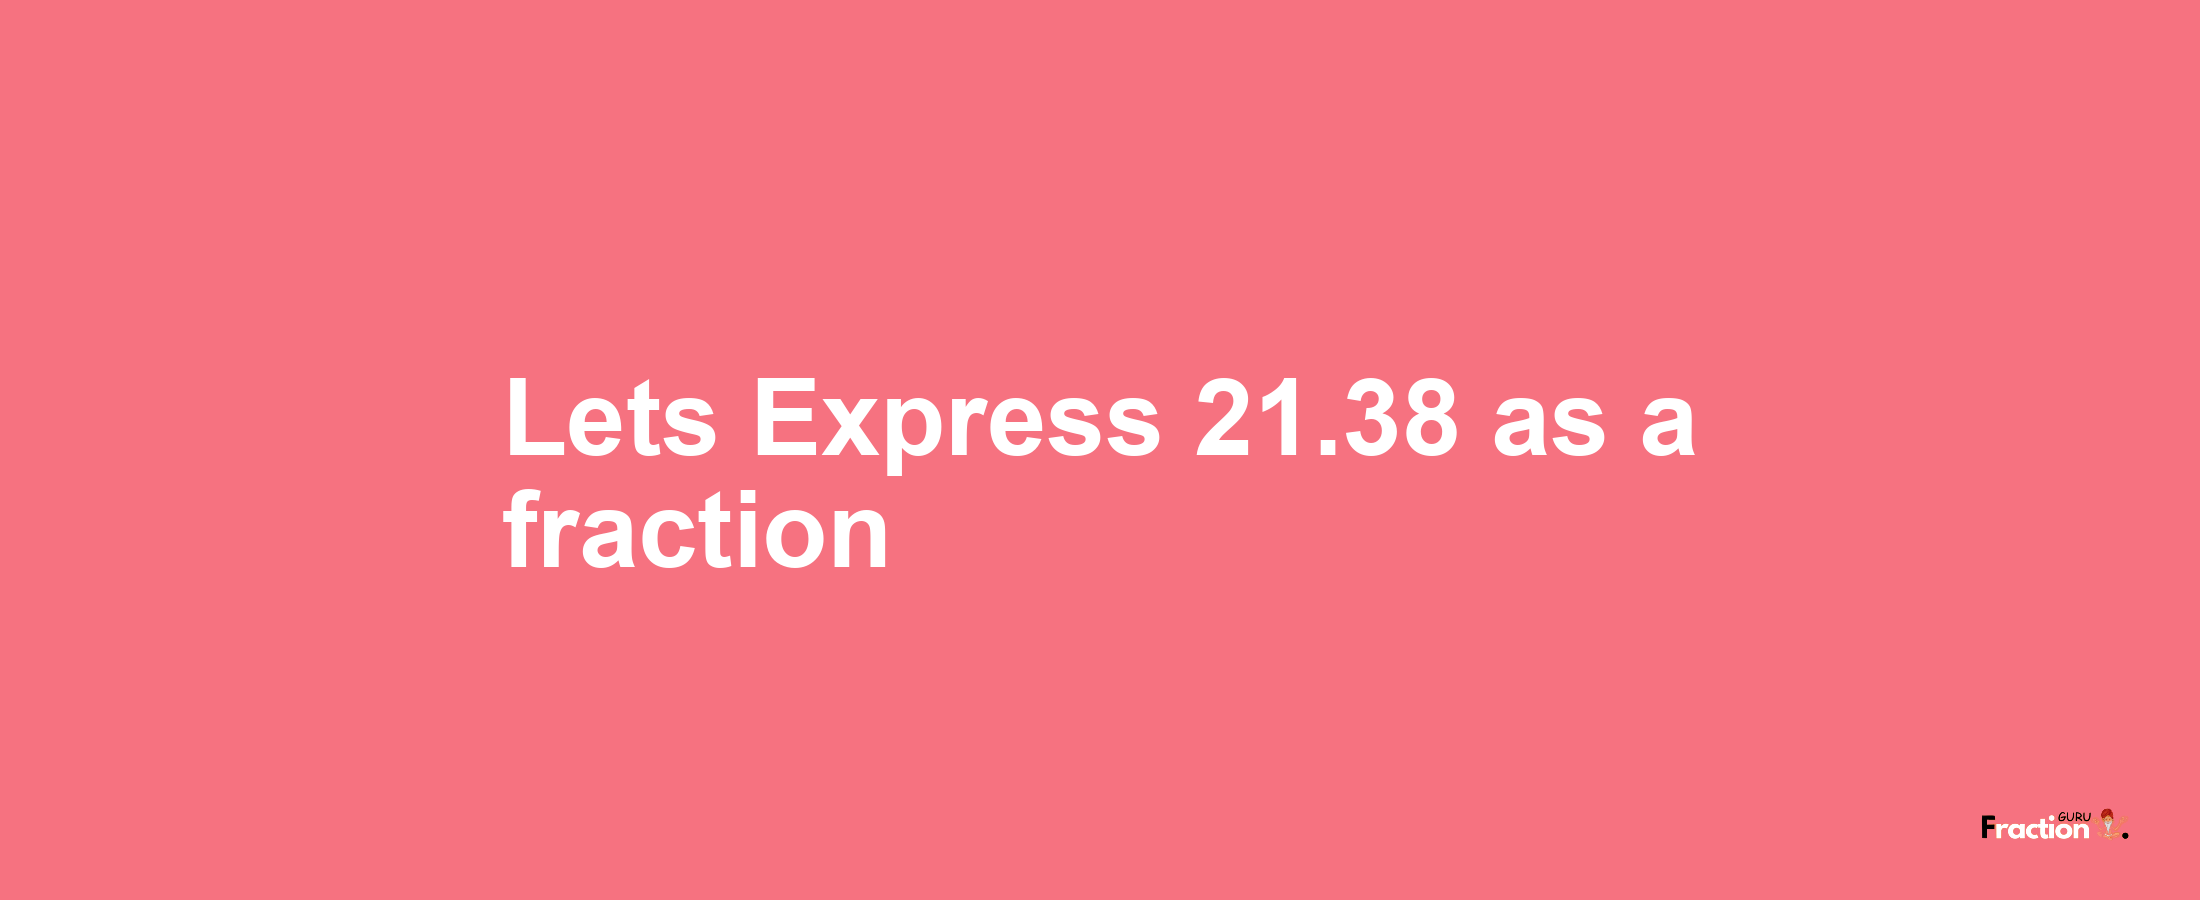 Lets Express 21.38 as afraction